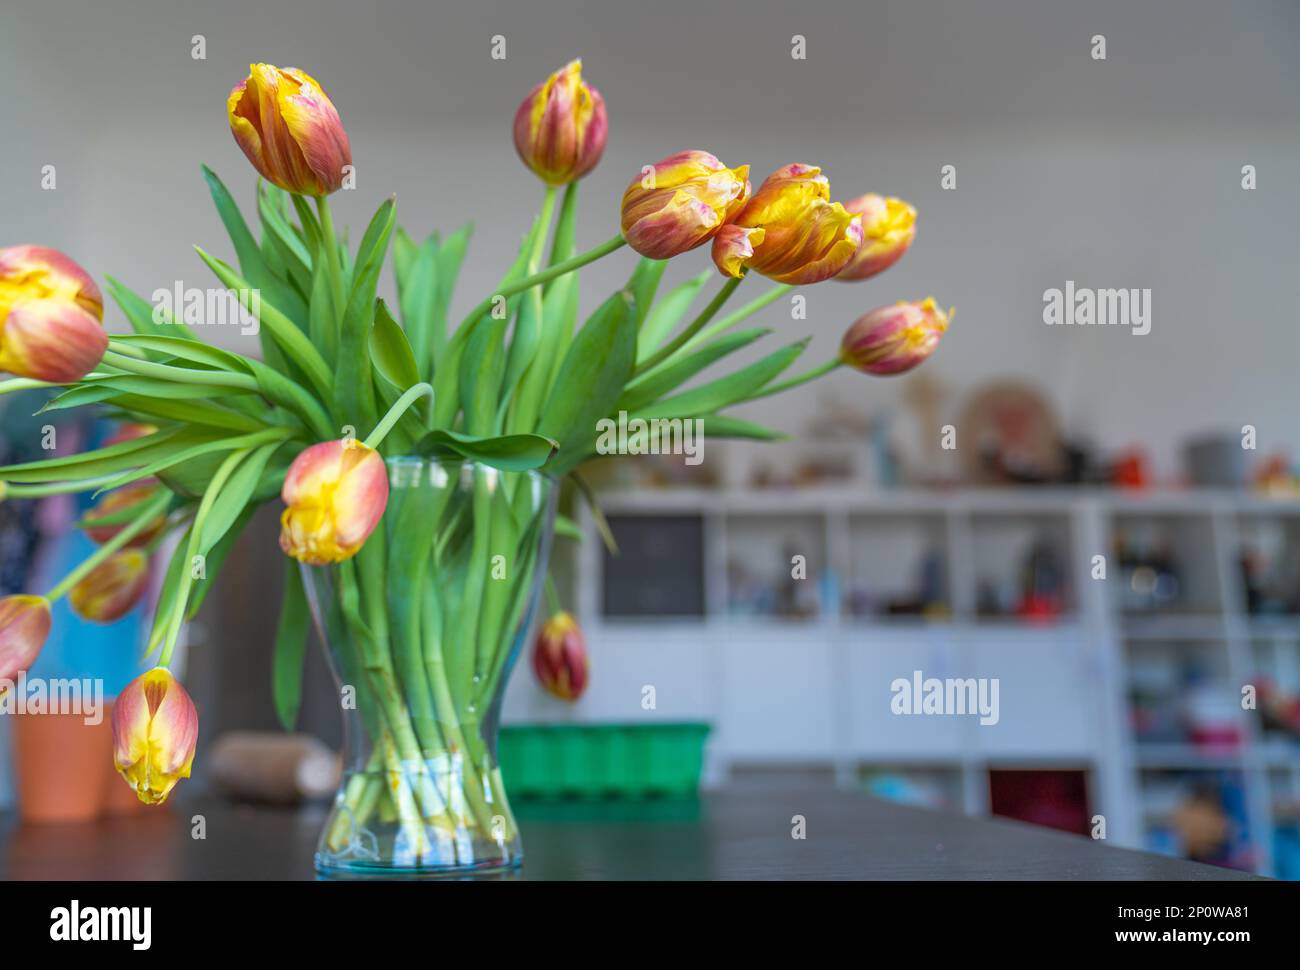 Bouquet of tulips in a transparent vase on the table in the apartment with a wardrobe on the background. Stock Photo